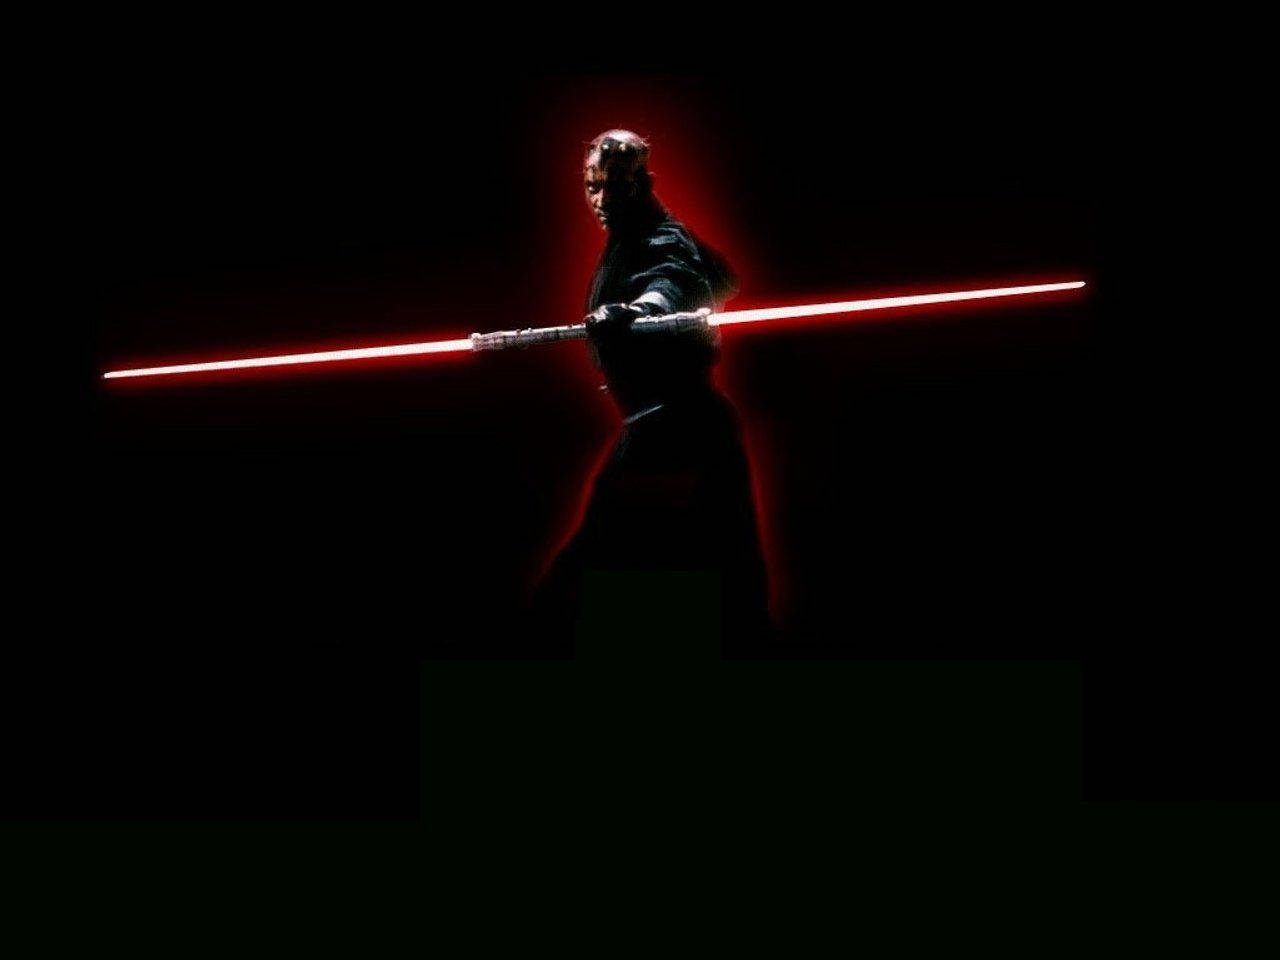 Darth Maul With His Red Lightsaber Background